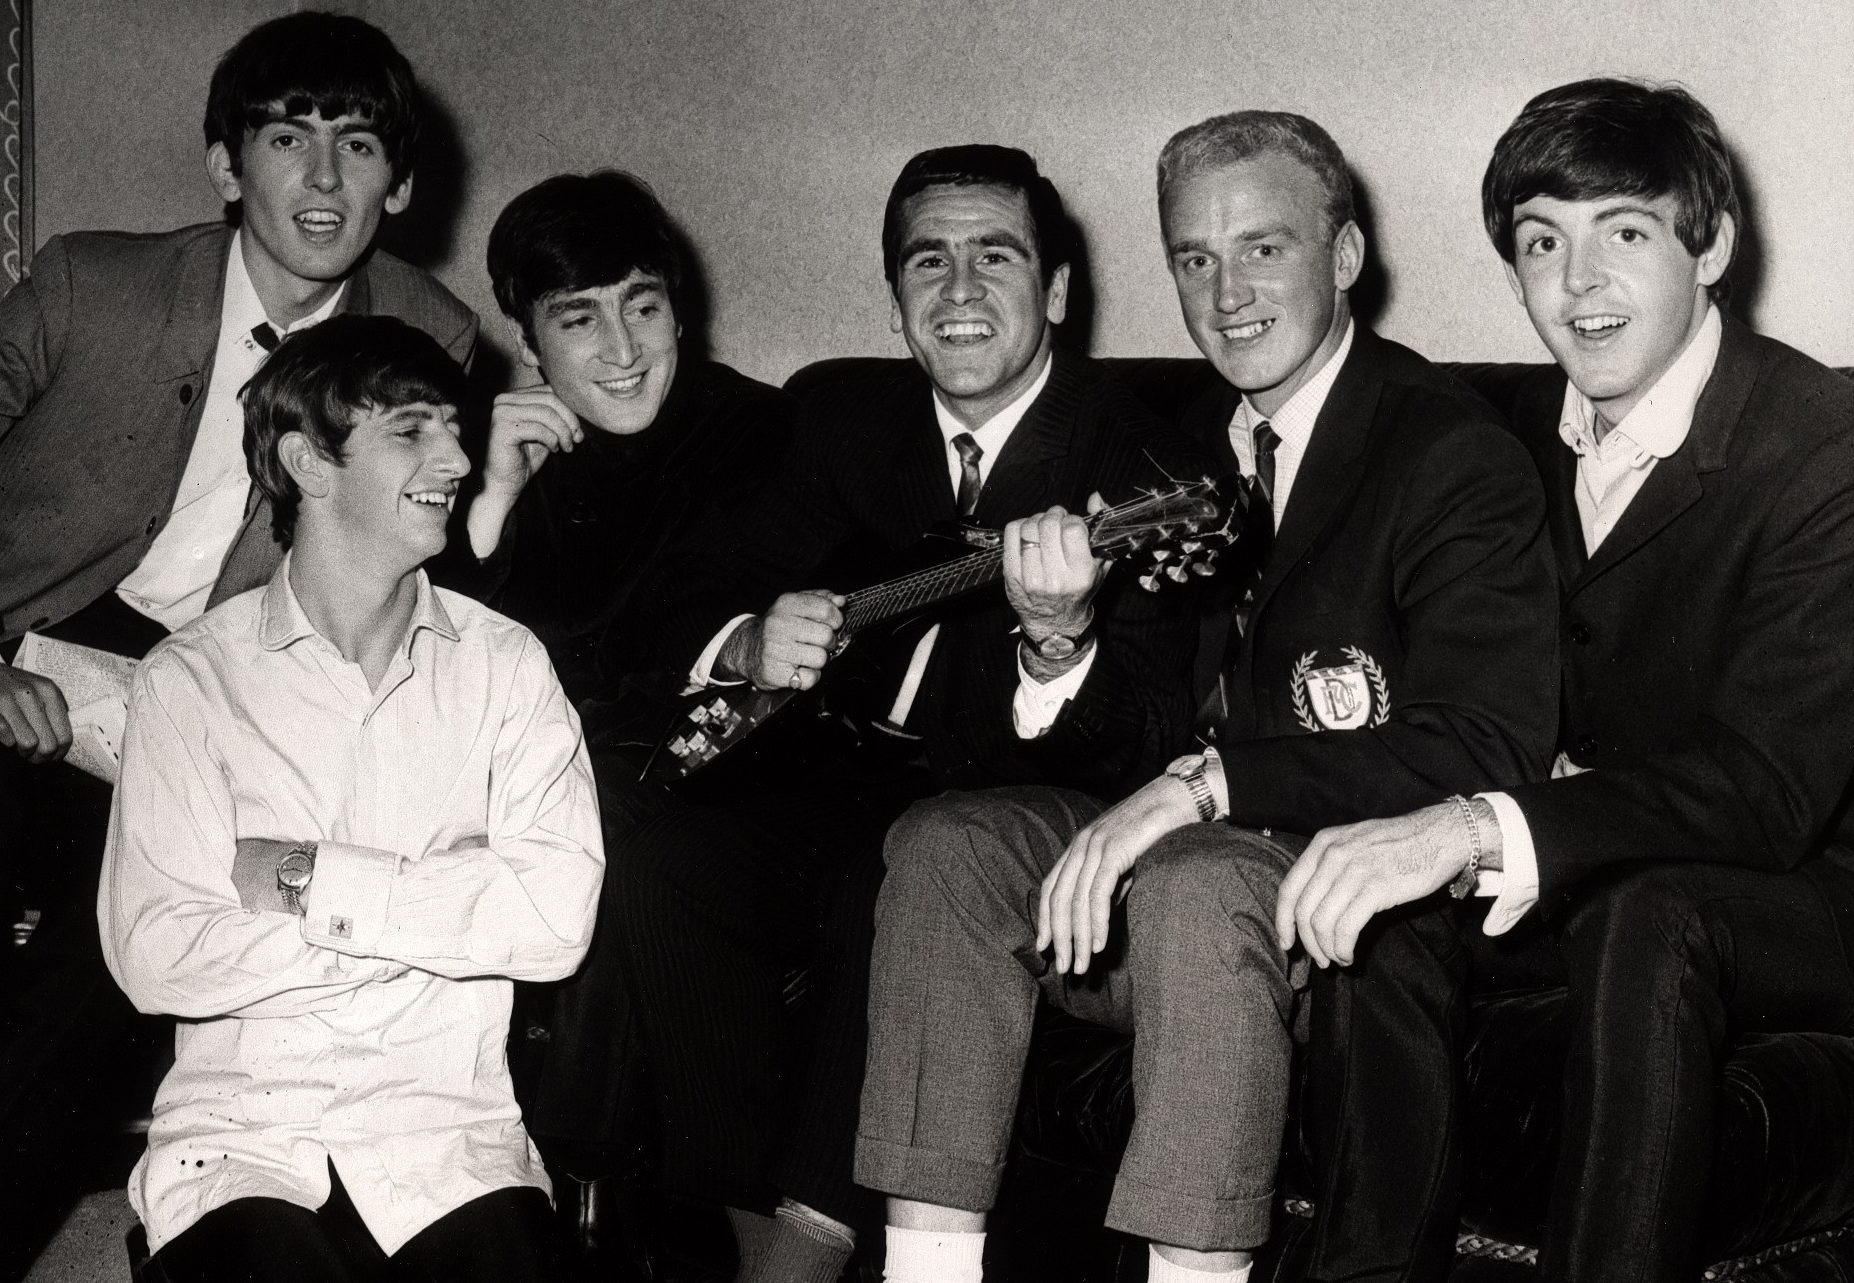 THe Beatles meet Dundee FC players Hugh Robertson and George Ryden on their 1963 visit to Dundee.